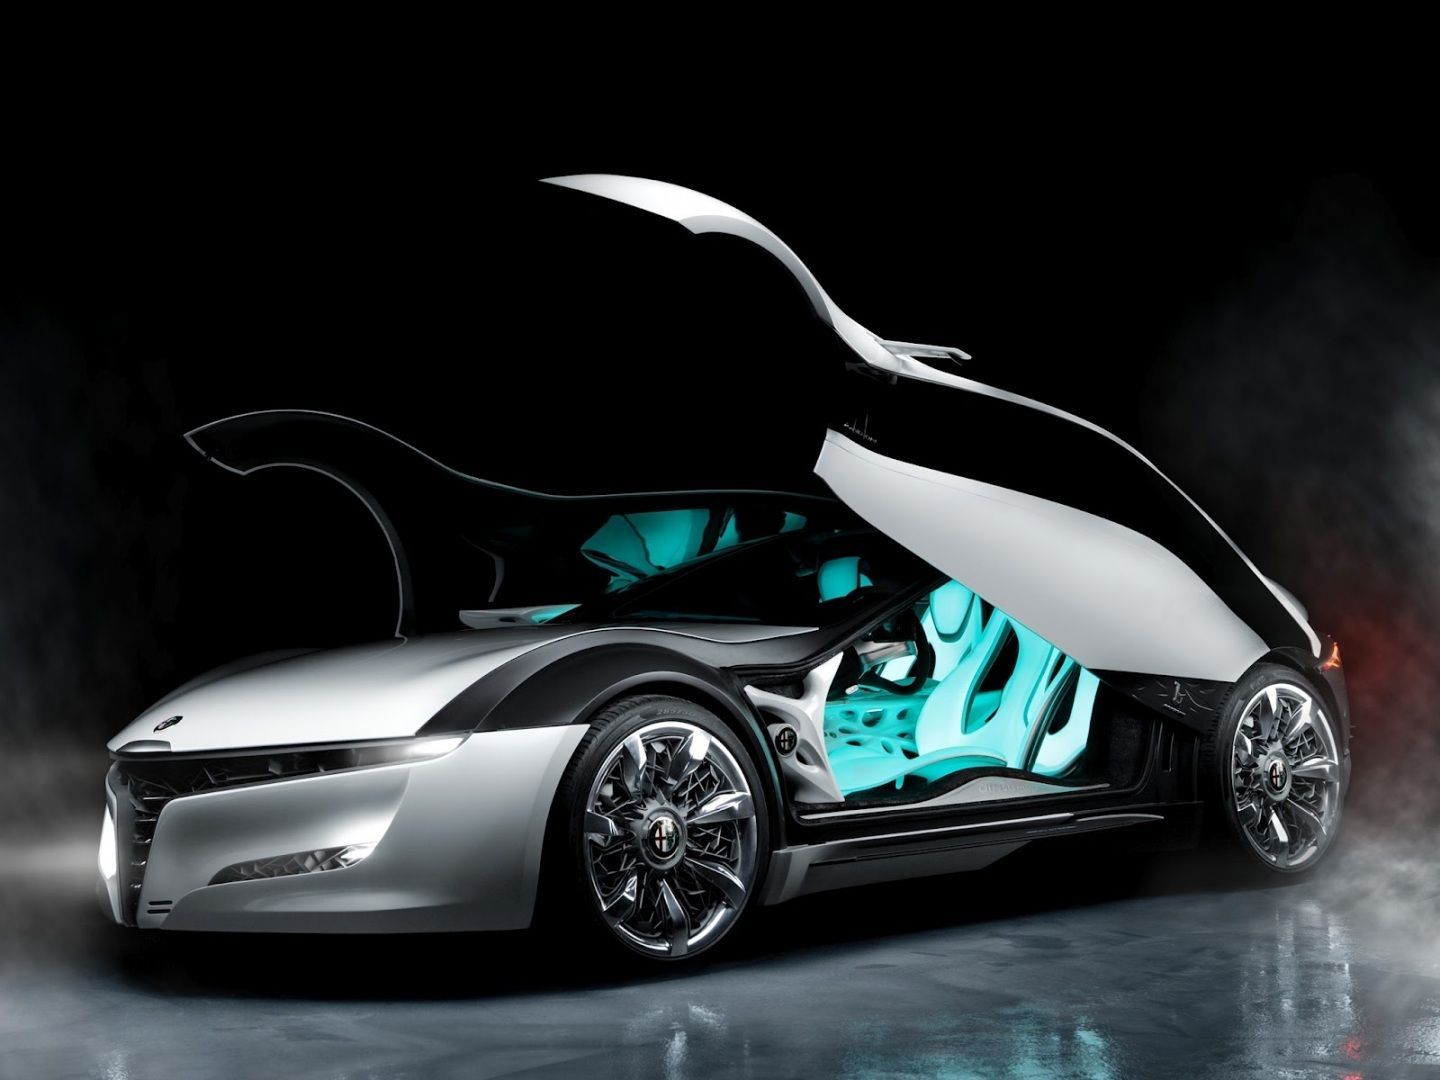 Collection of Cars Wallpaper For Pc on HDWallpaper. Futuristic cars, Concept cars, Sport cars